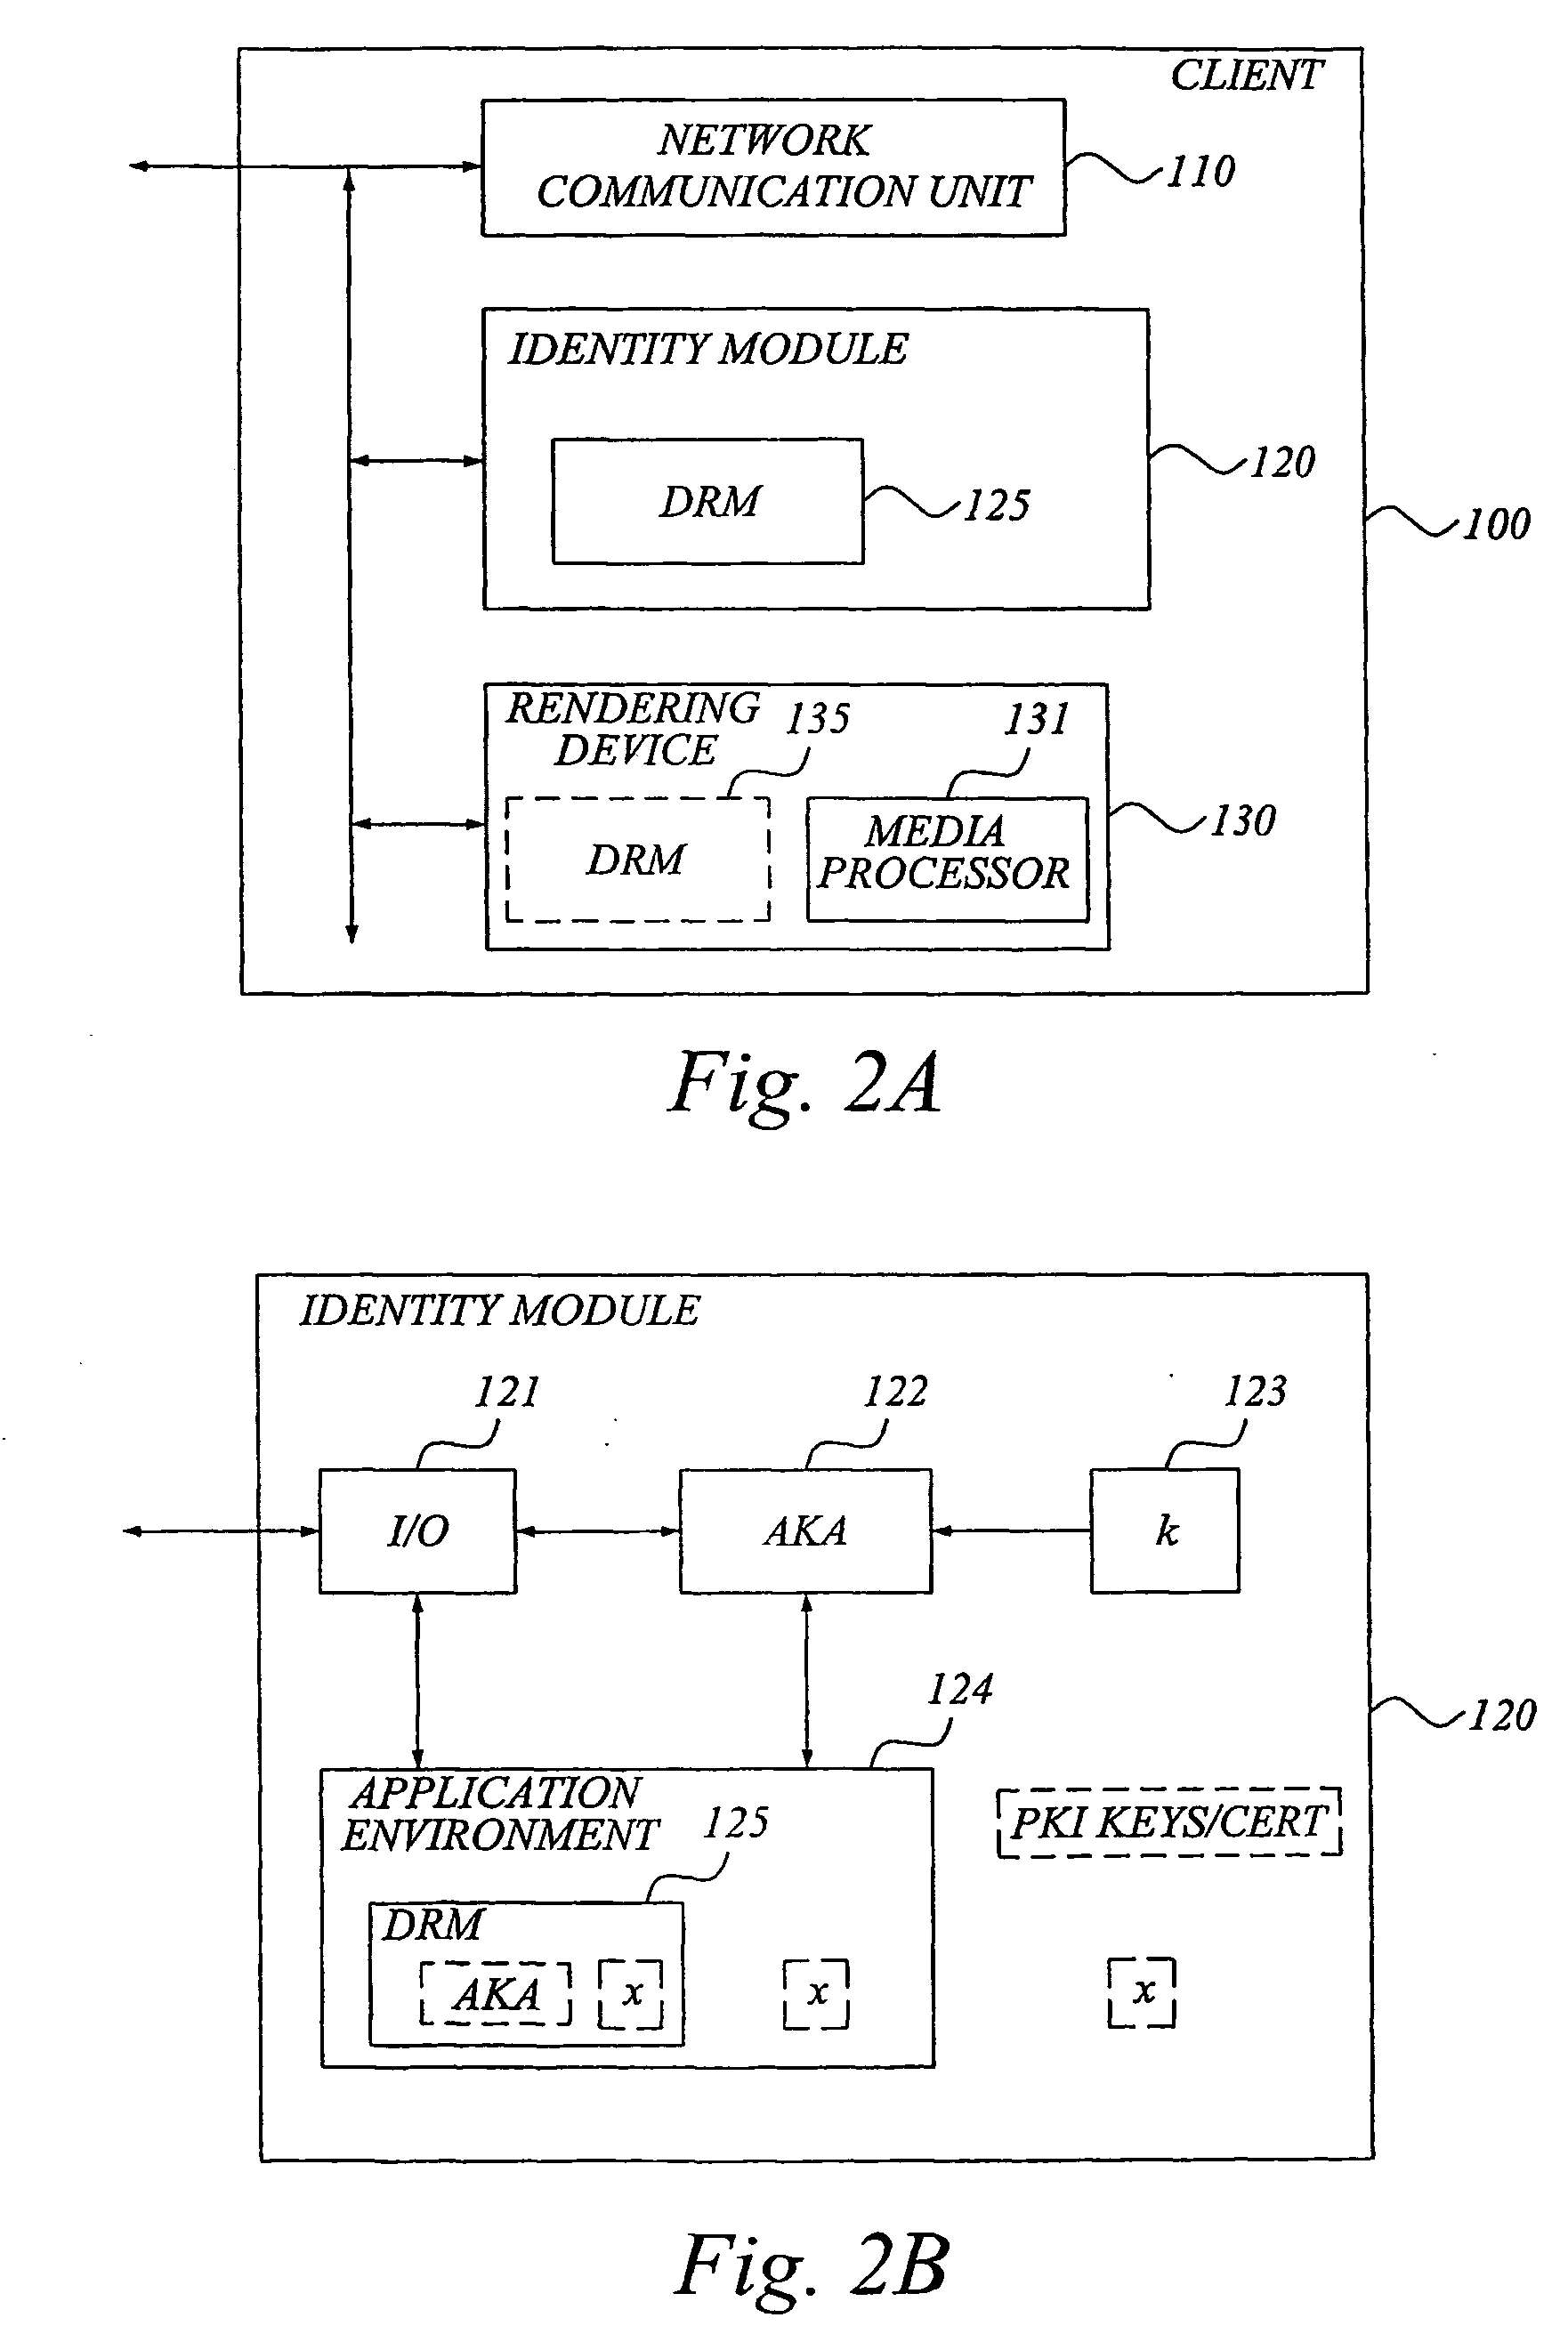 Robust and flexible digital rights management involving a tamper-resistant identity module